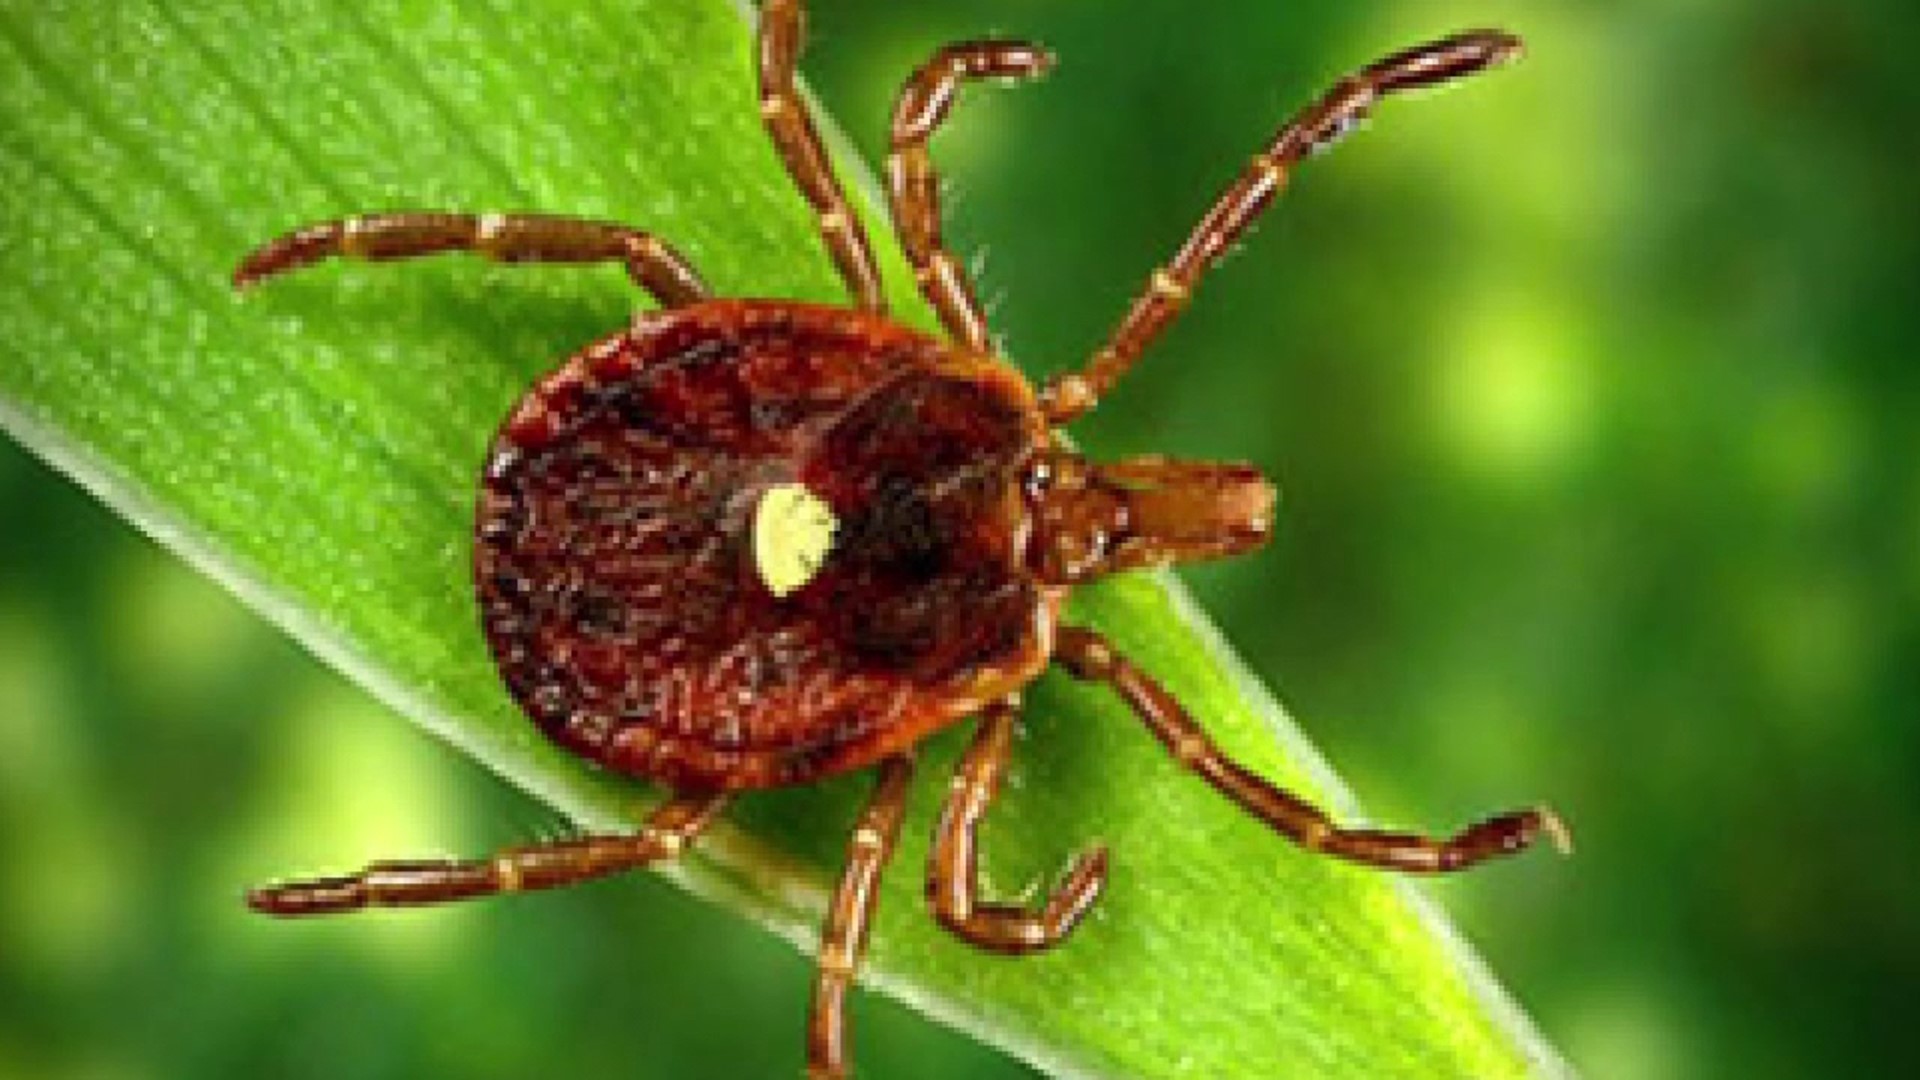 A bite from a lone star tick can cause a meat allergy called alpha-gal syndrome (AGS).